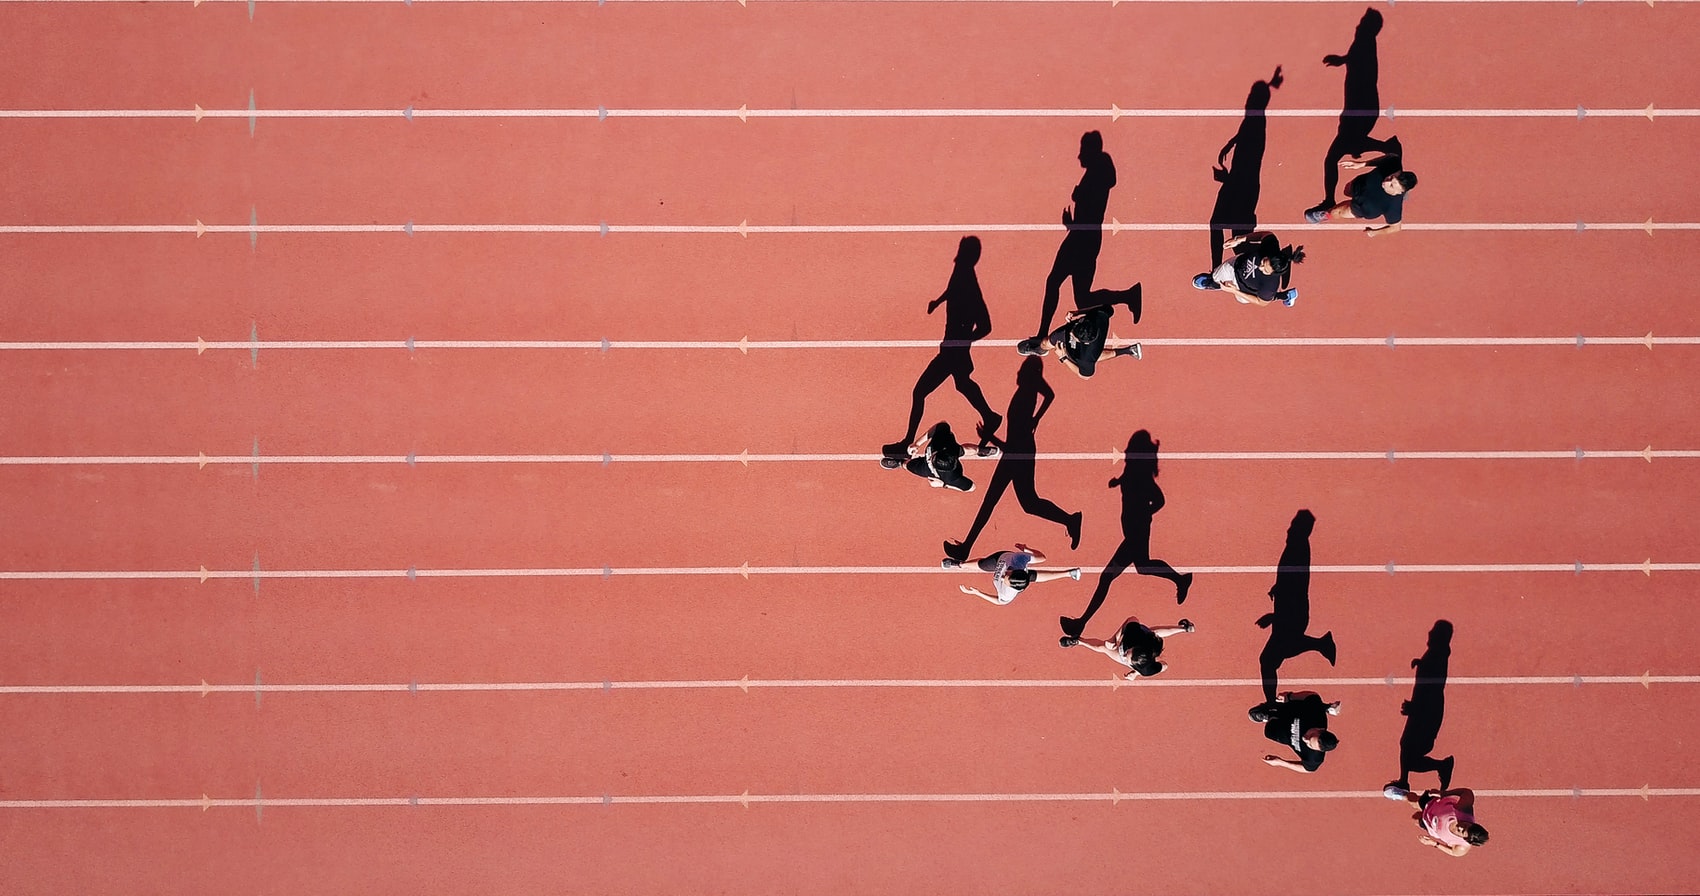 8 people running on a red running track